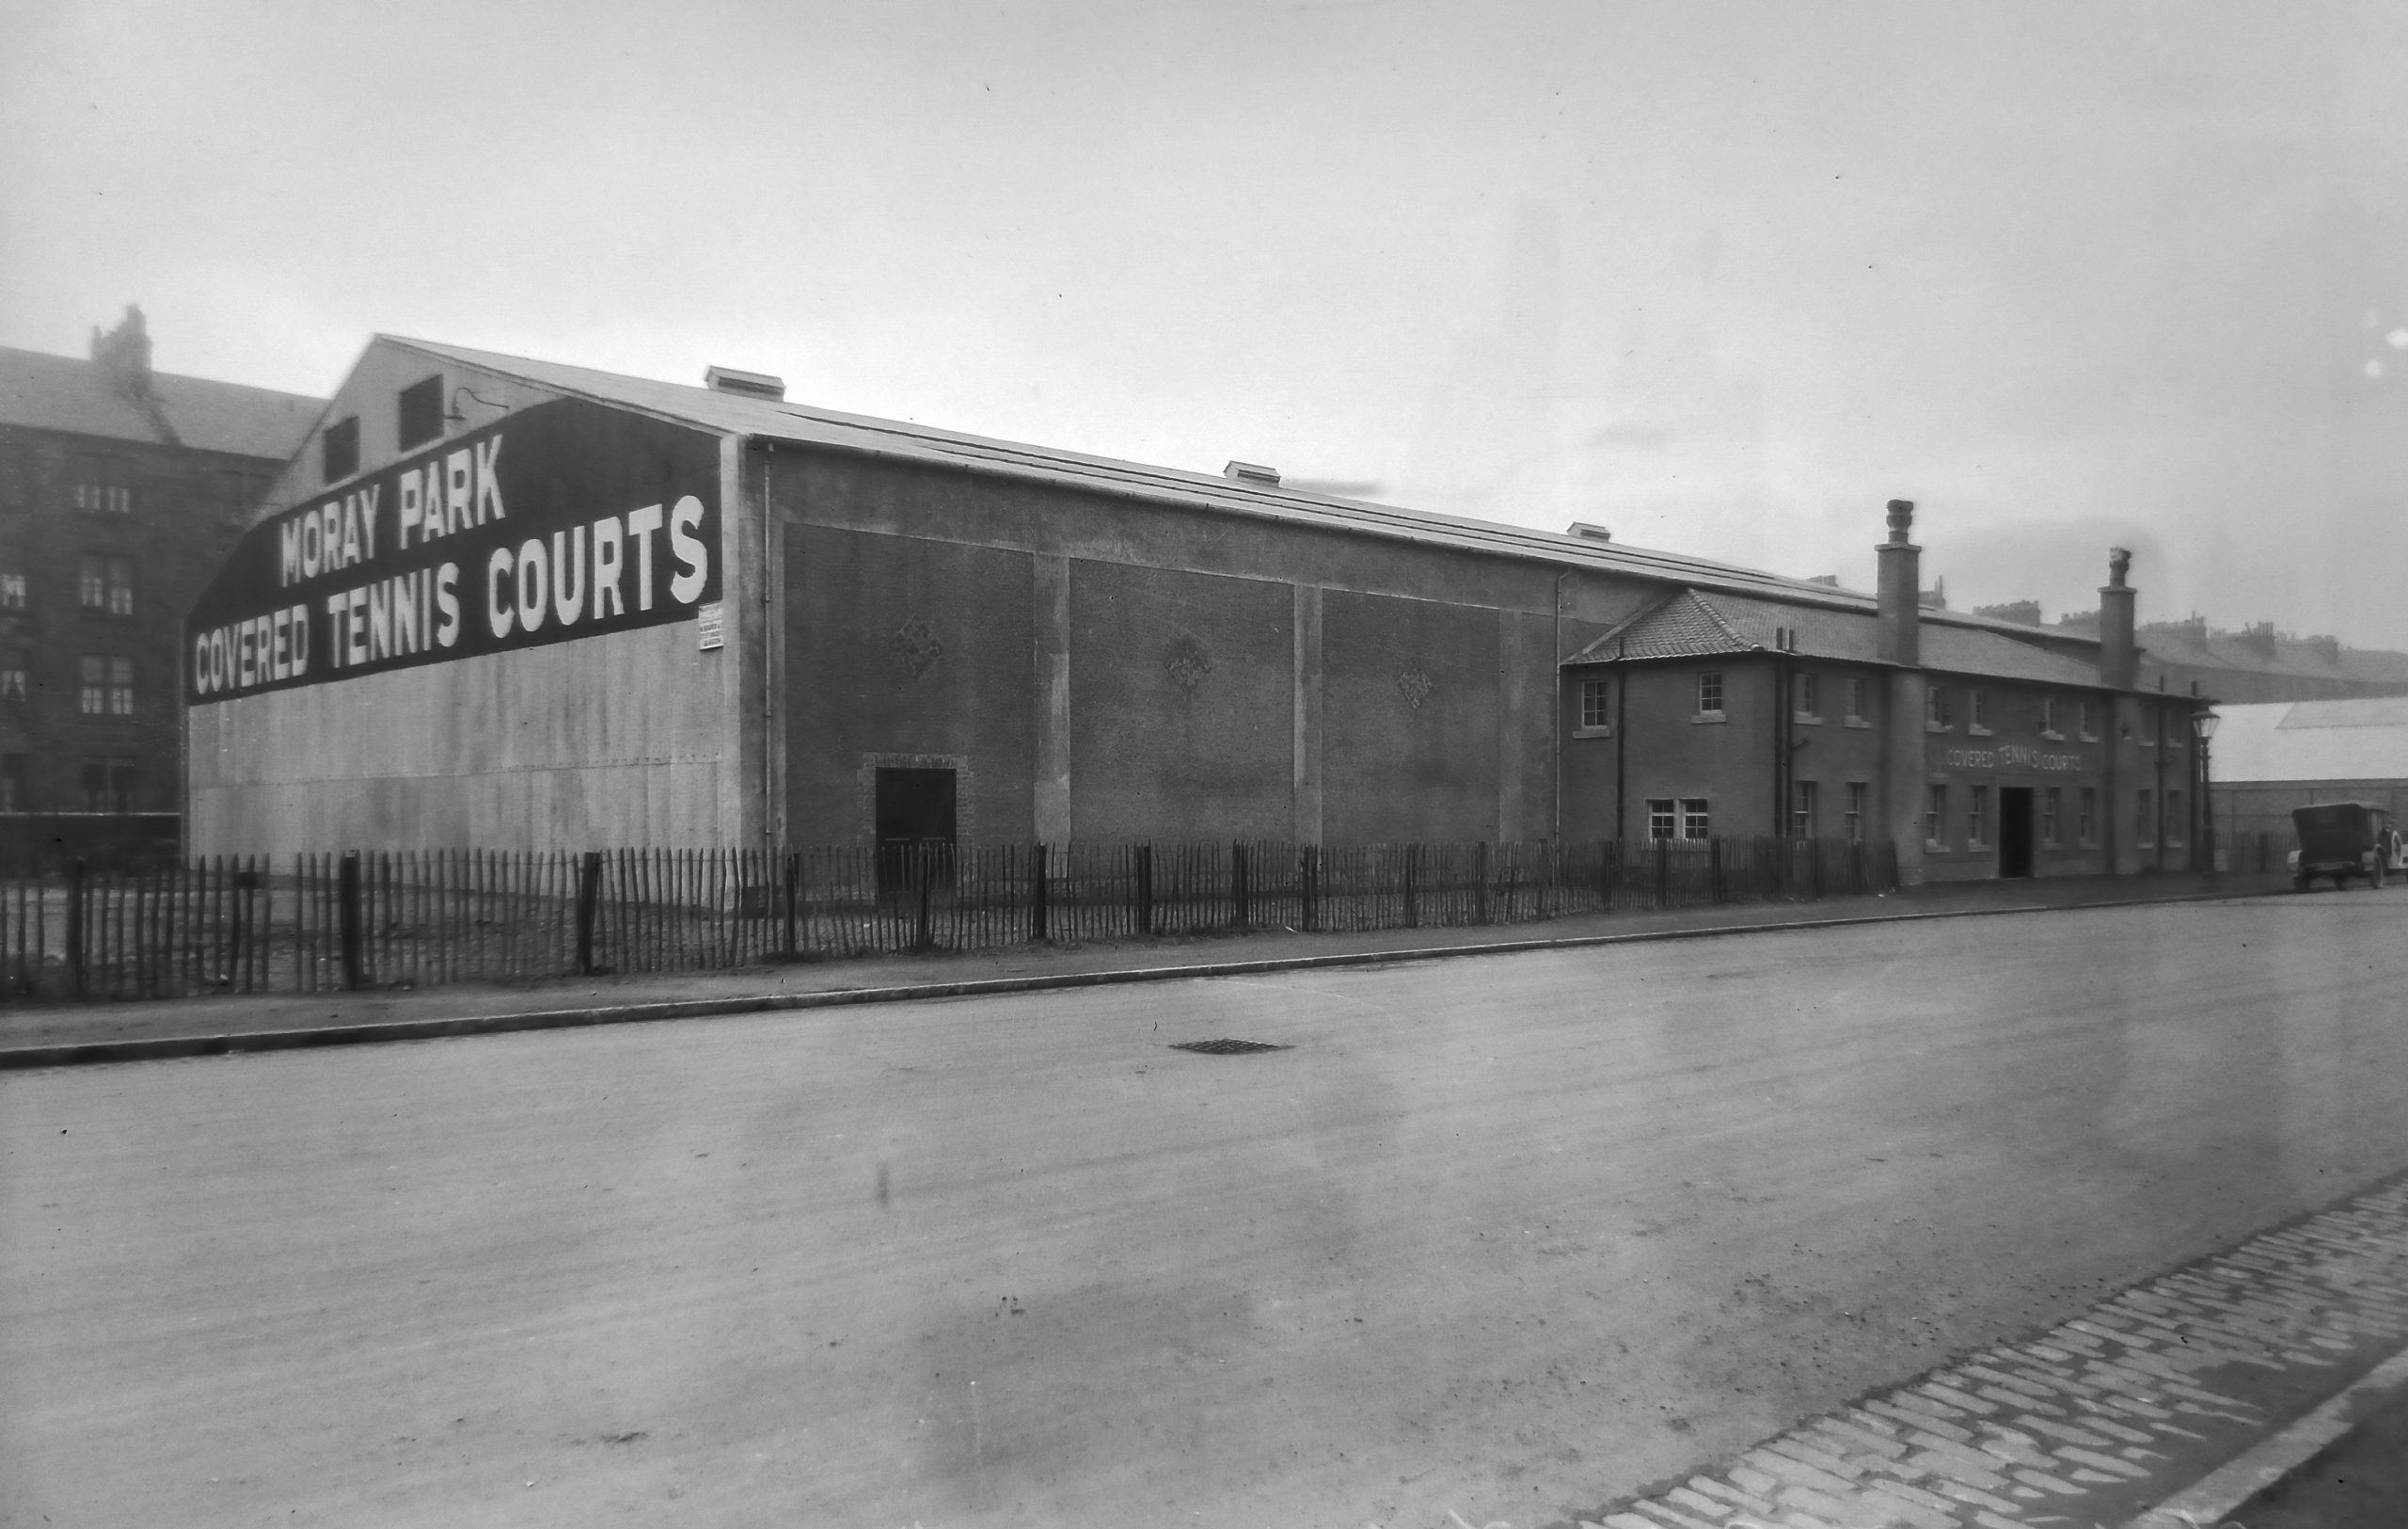 Large warehouse with name on side, and a more ornate office building at the front